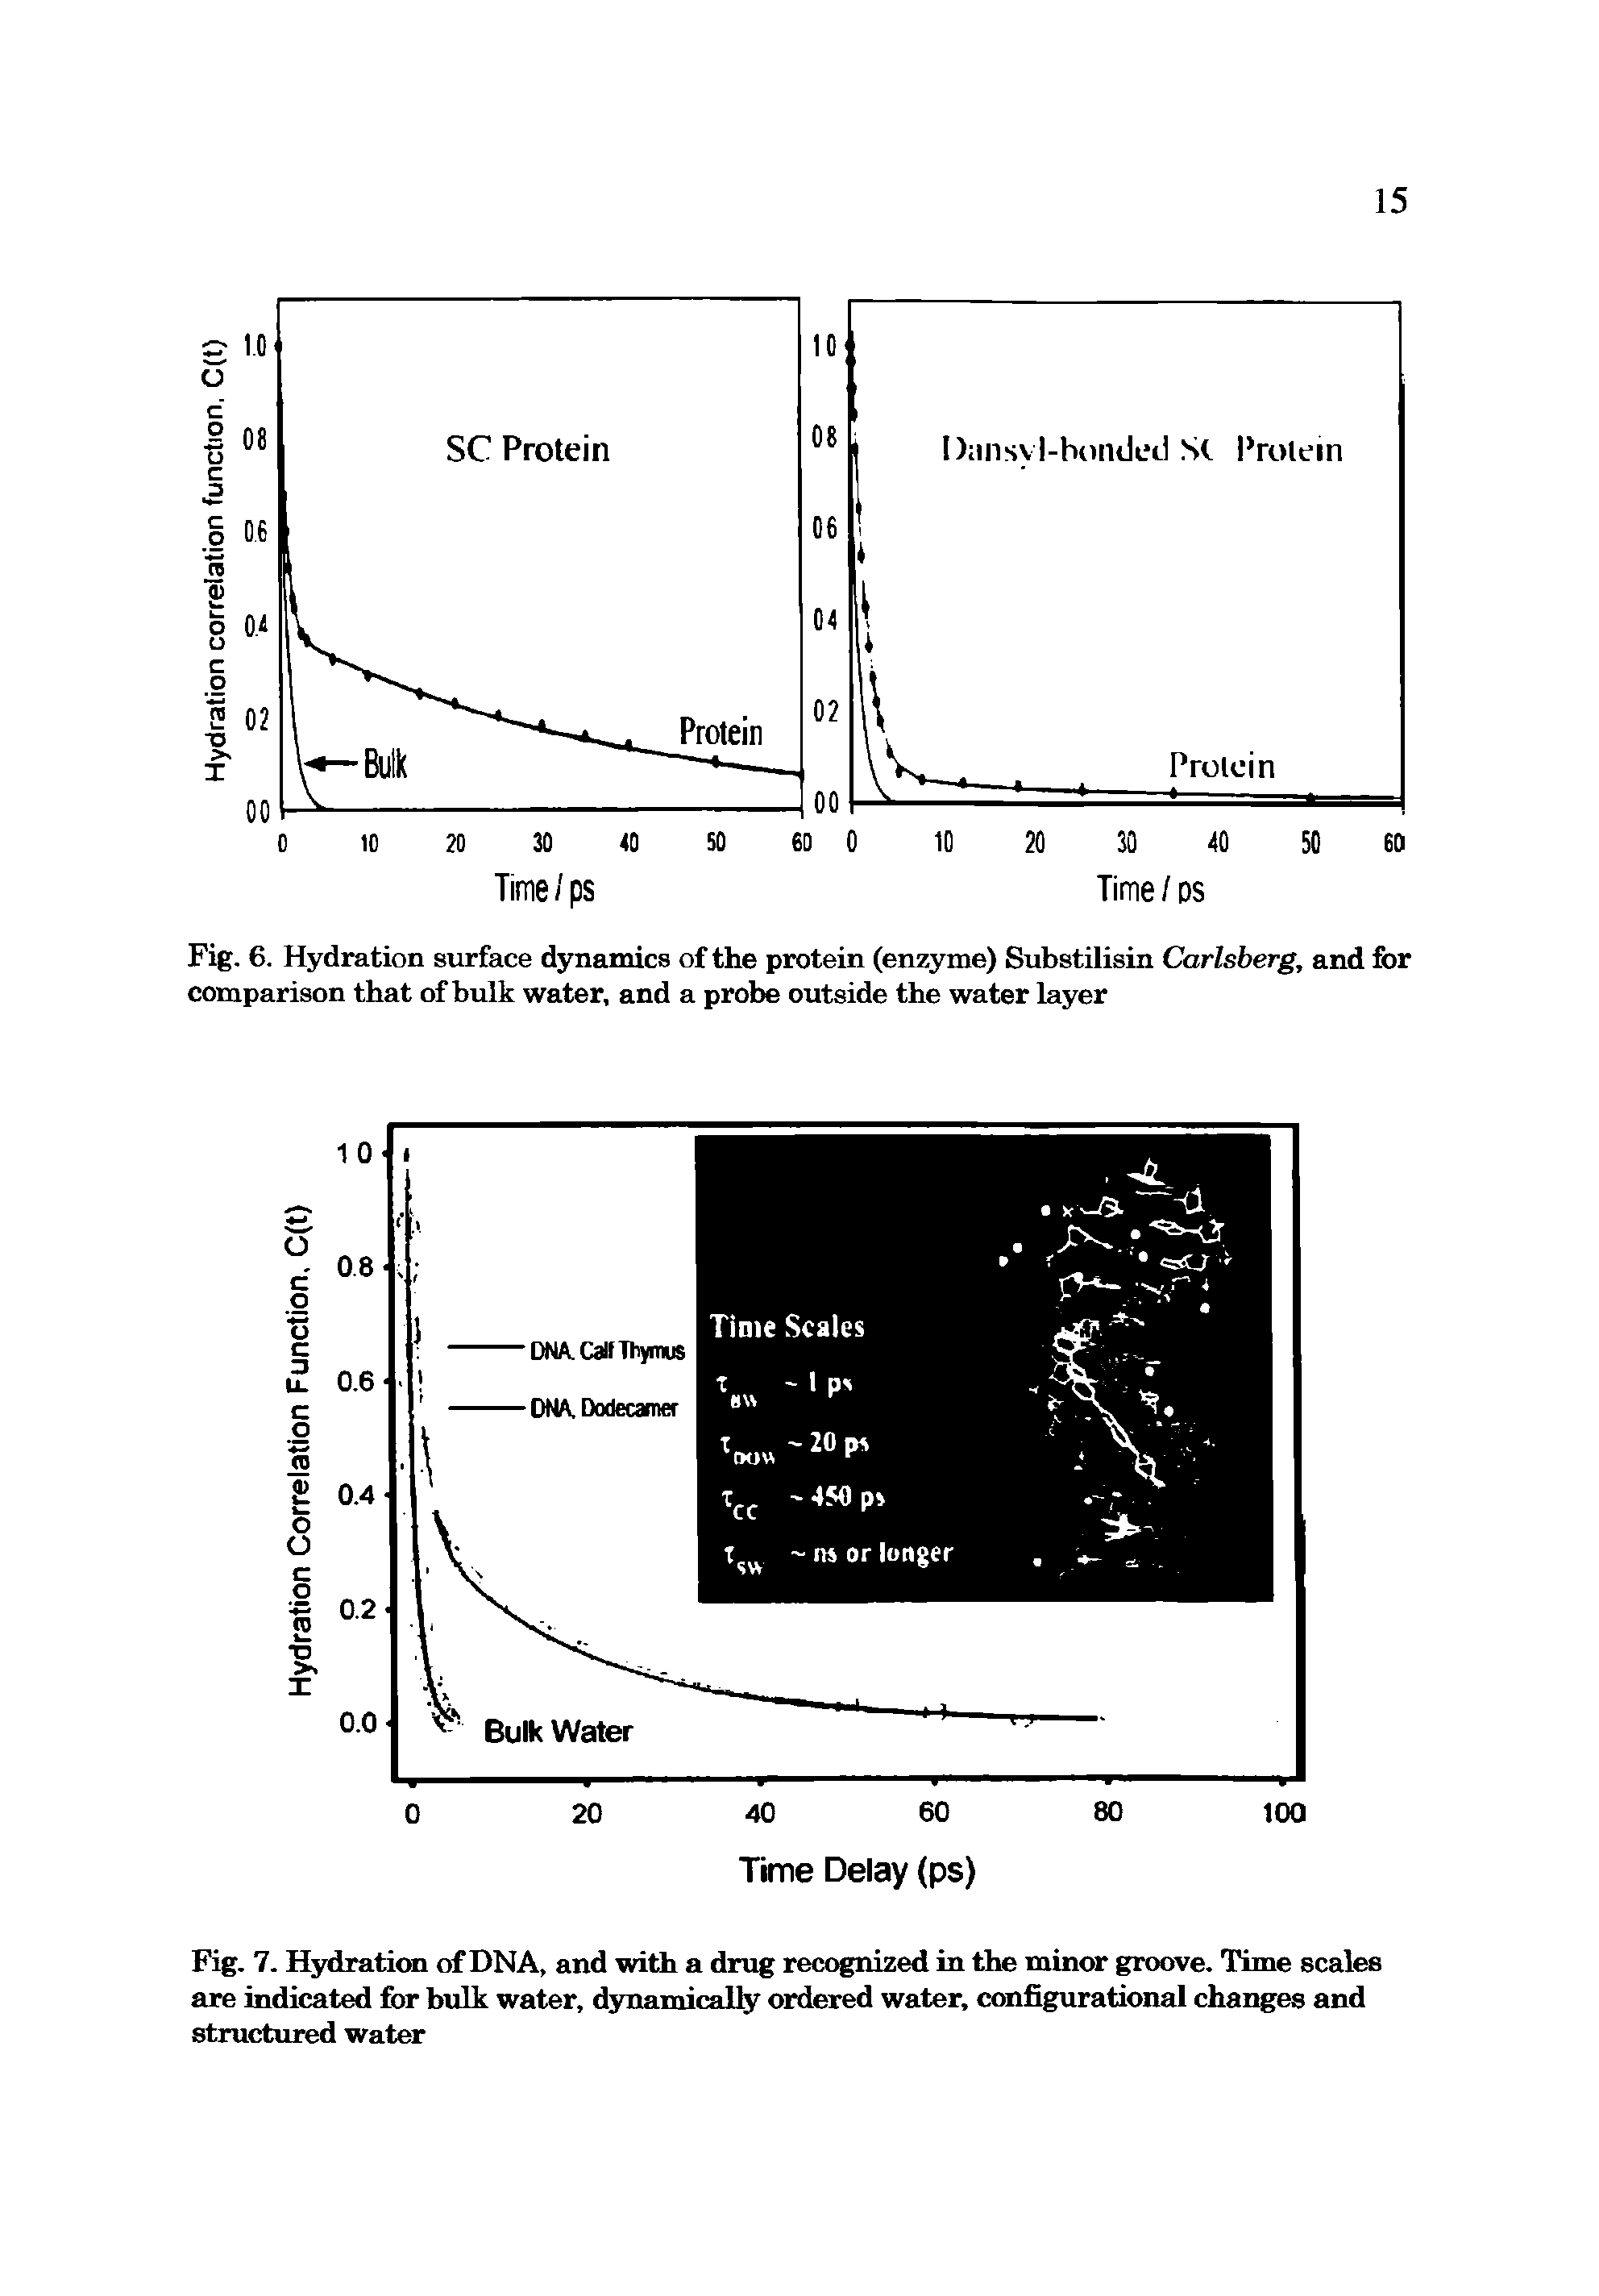 Fig. 6. Hydration surface dynamics of the protein (enzyme) Substilisin Carlsberg, and for comparison that of bulk water, and a probe outside the water layer...